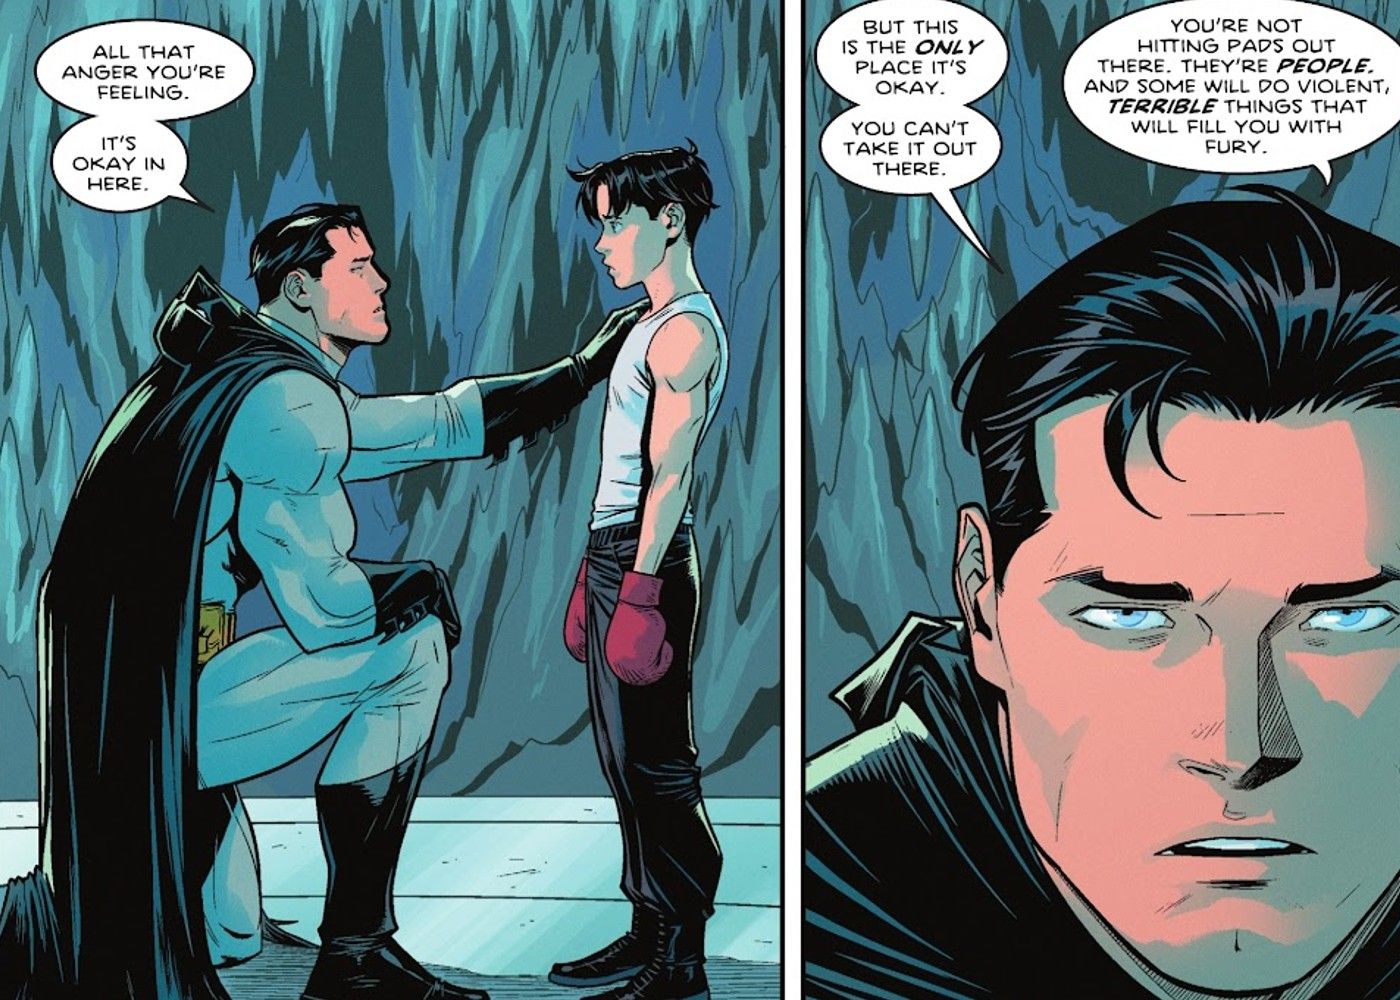 Comic book panels: Batman kneels down to speak to a young Dick Grayson.